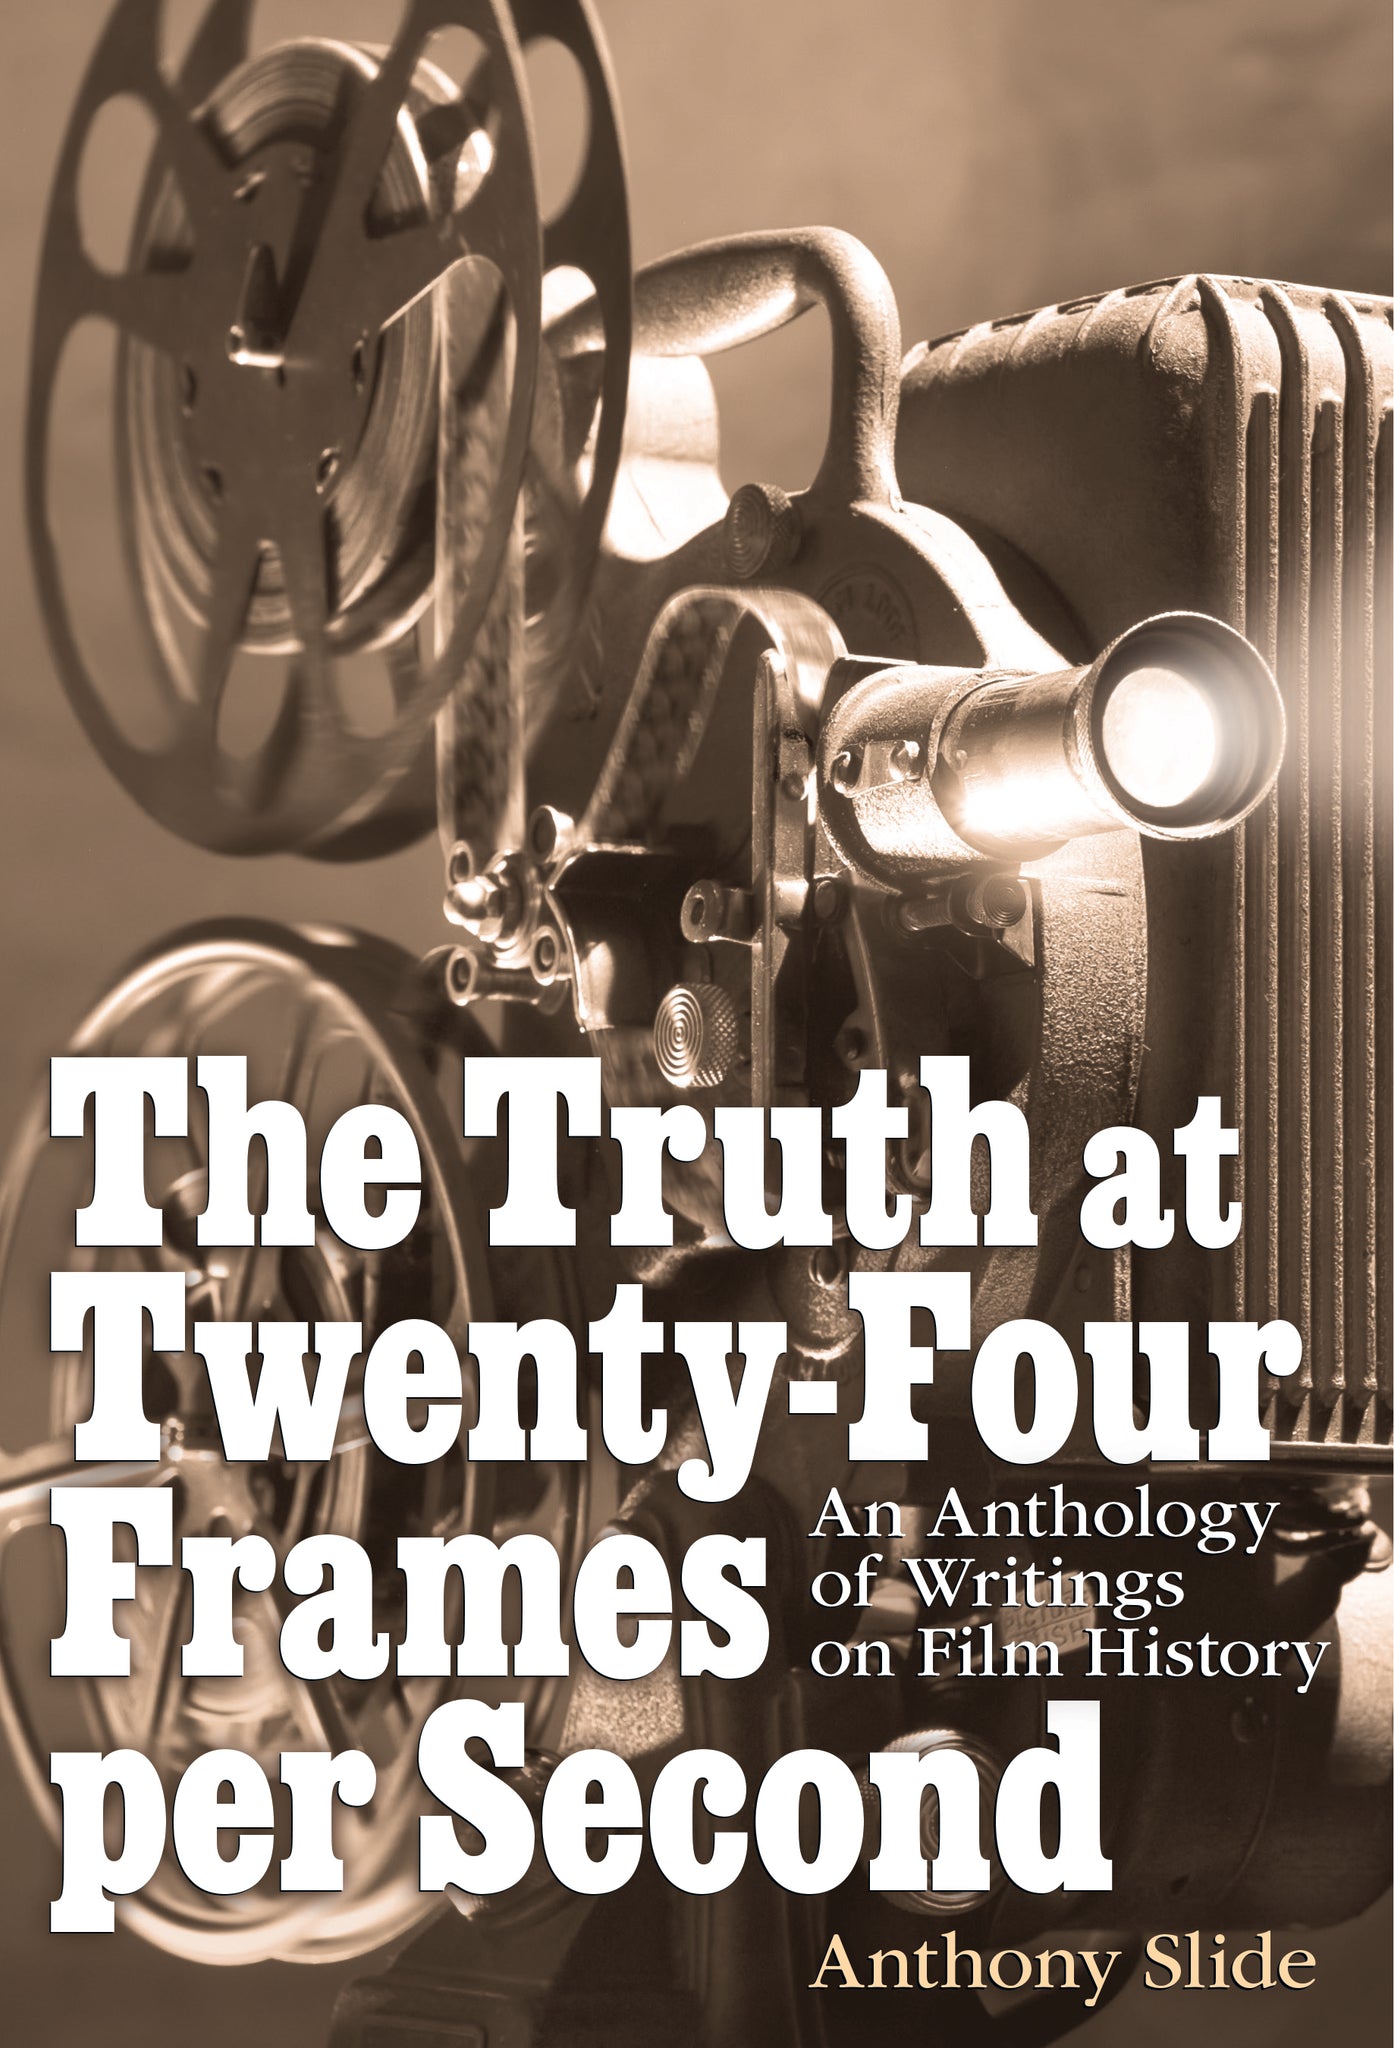 The Truth at Twenty-Four Frames per Second: An Anthology of Writings on Film History (ebook)